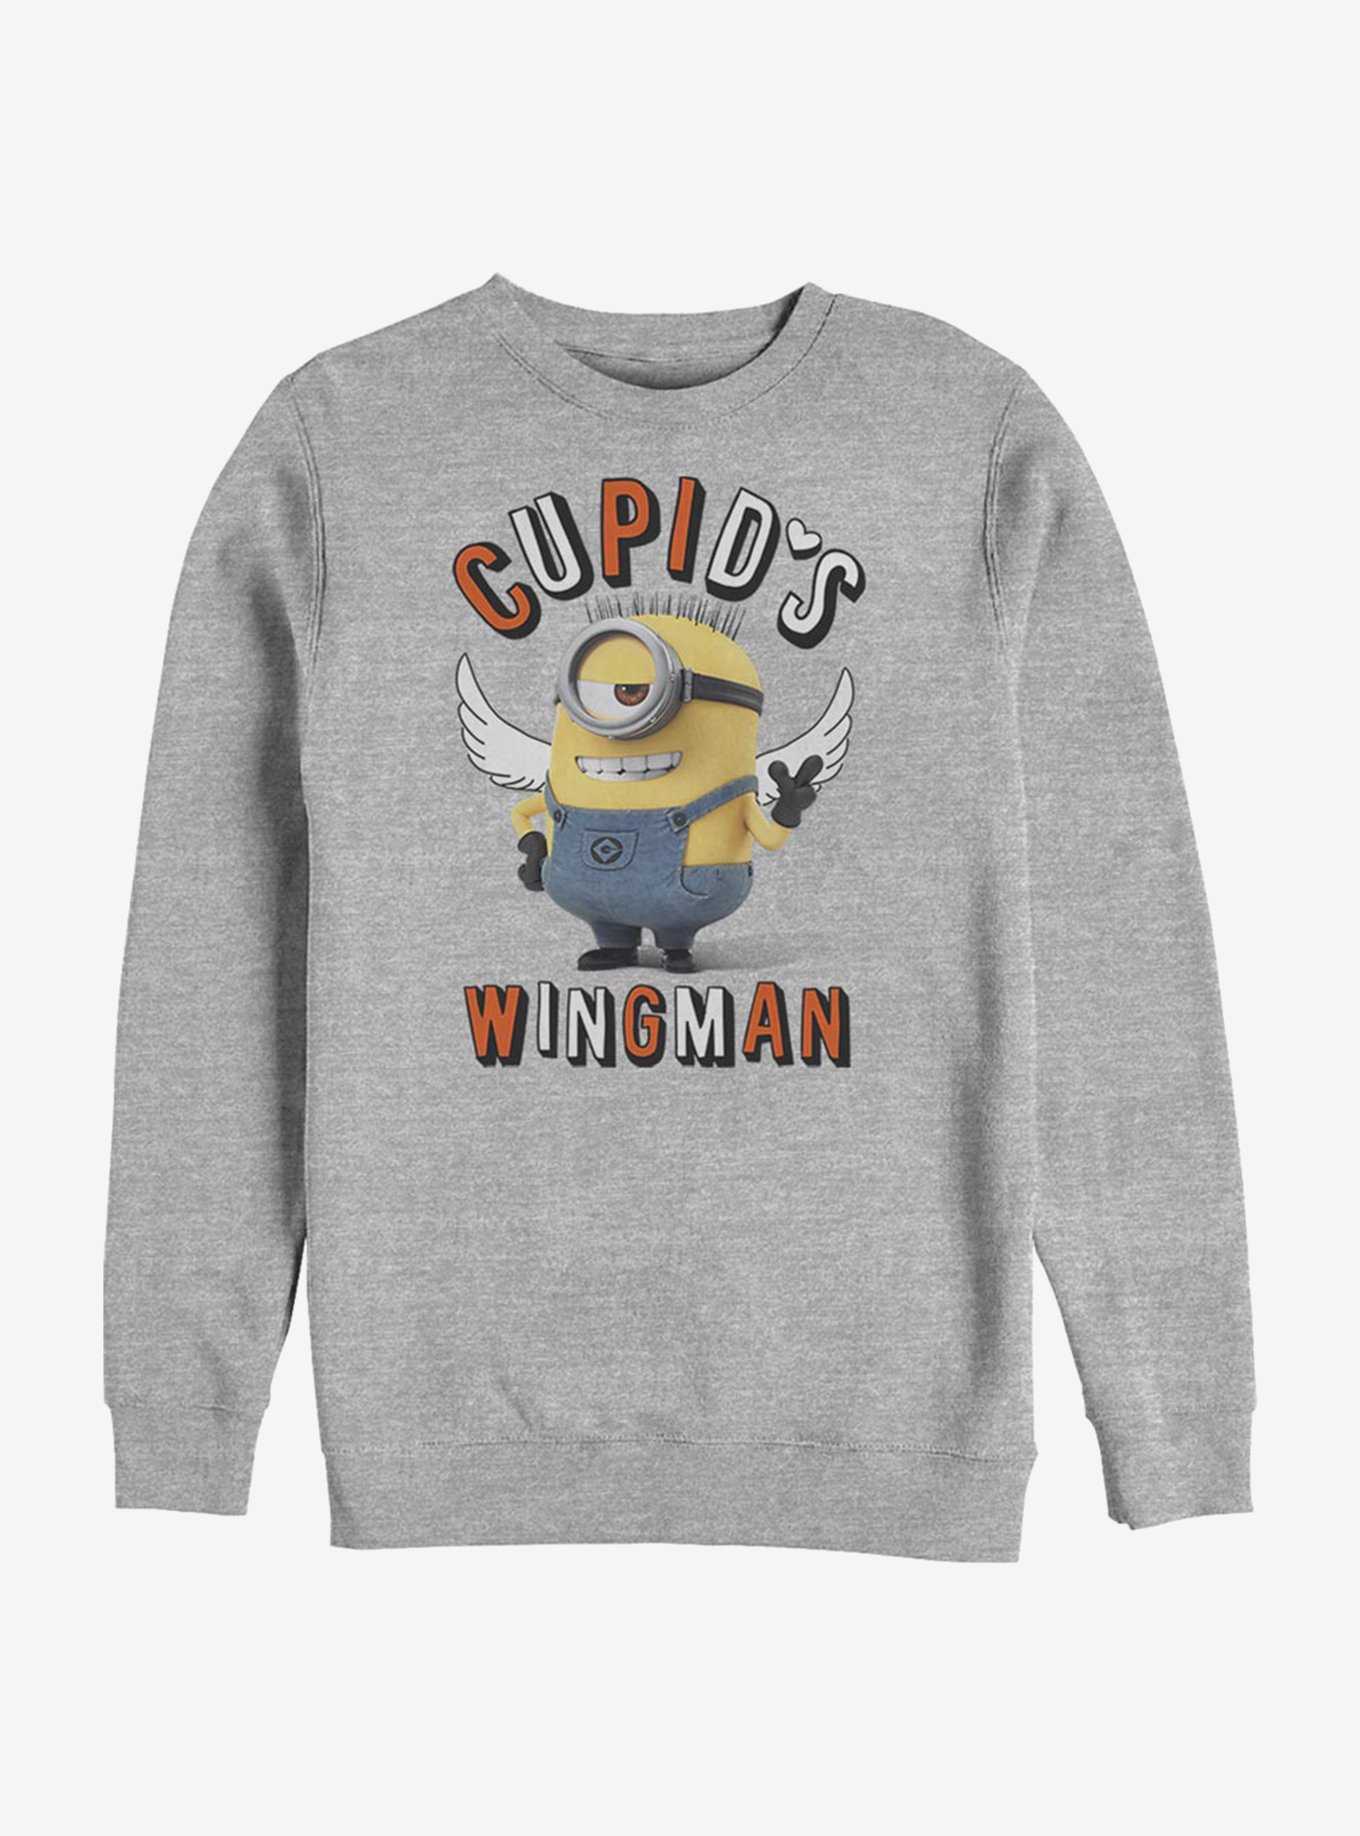 OFFICIAL Despicable Me Shirts & Merch | BoxLunch